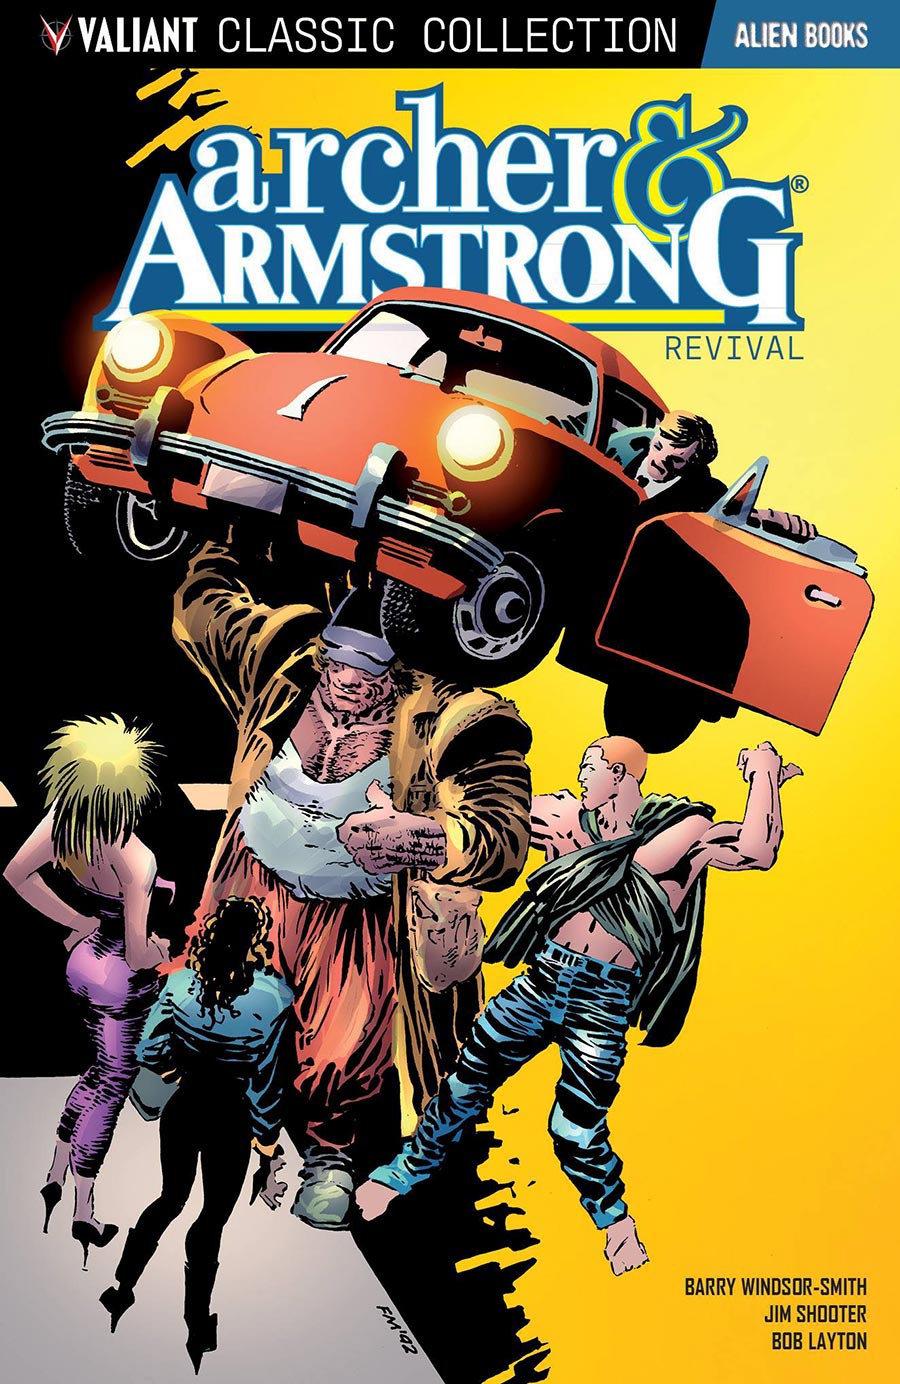 Valiant Classics Collection Archer & Armstrong Revival TP